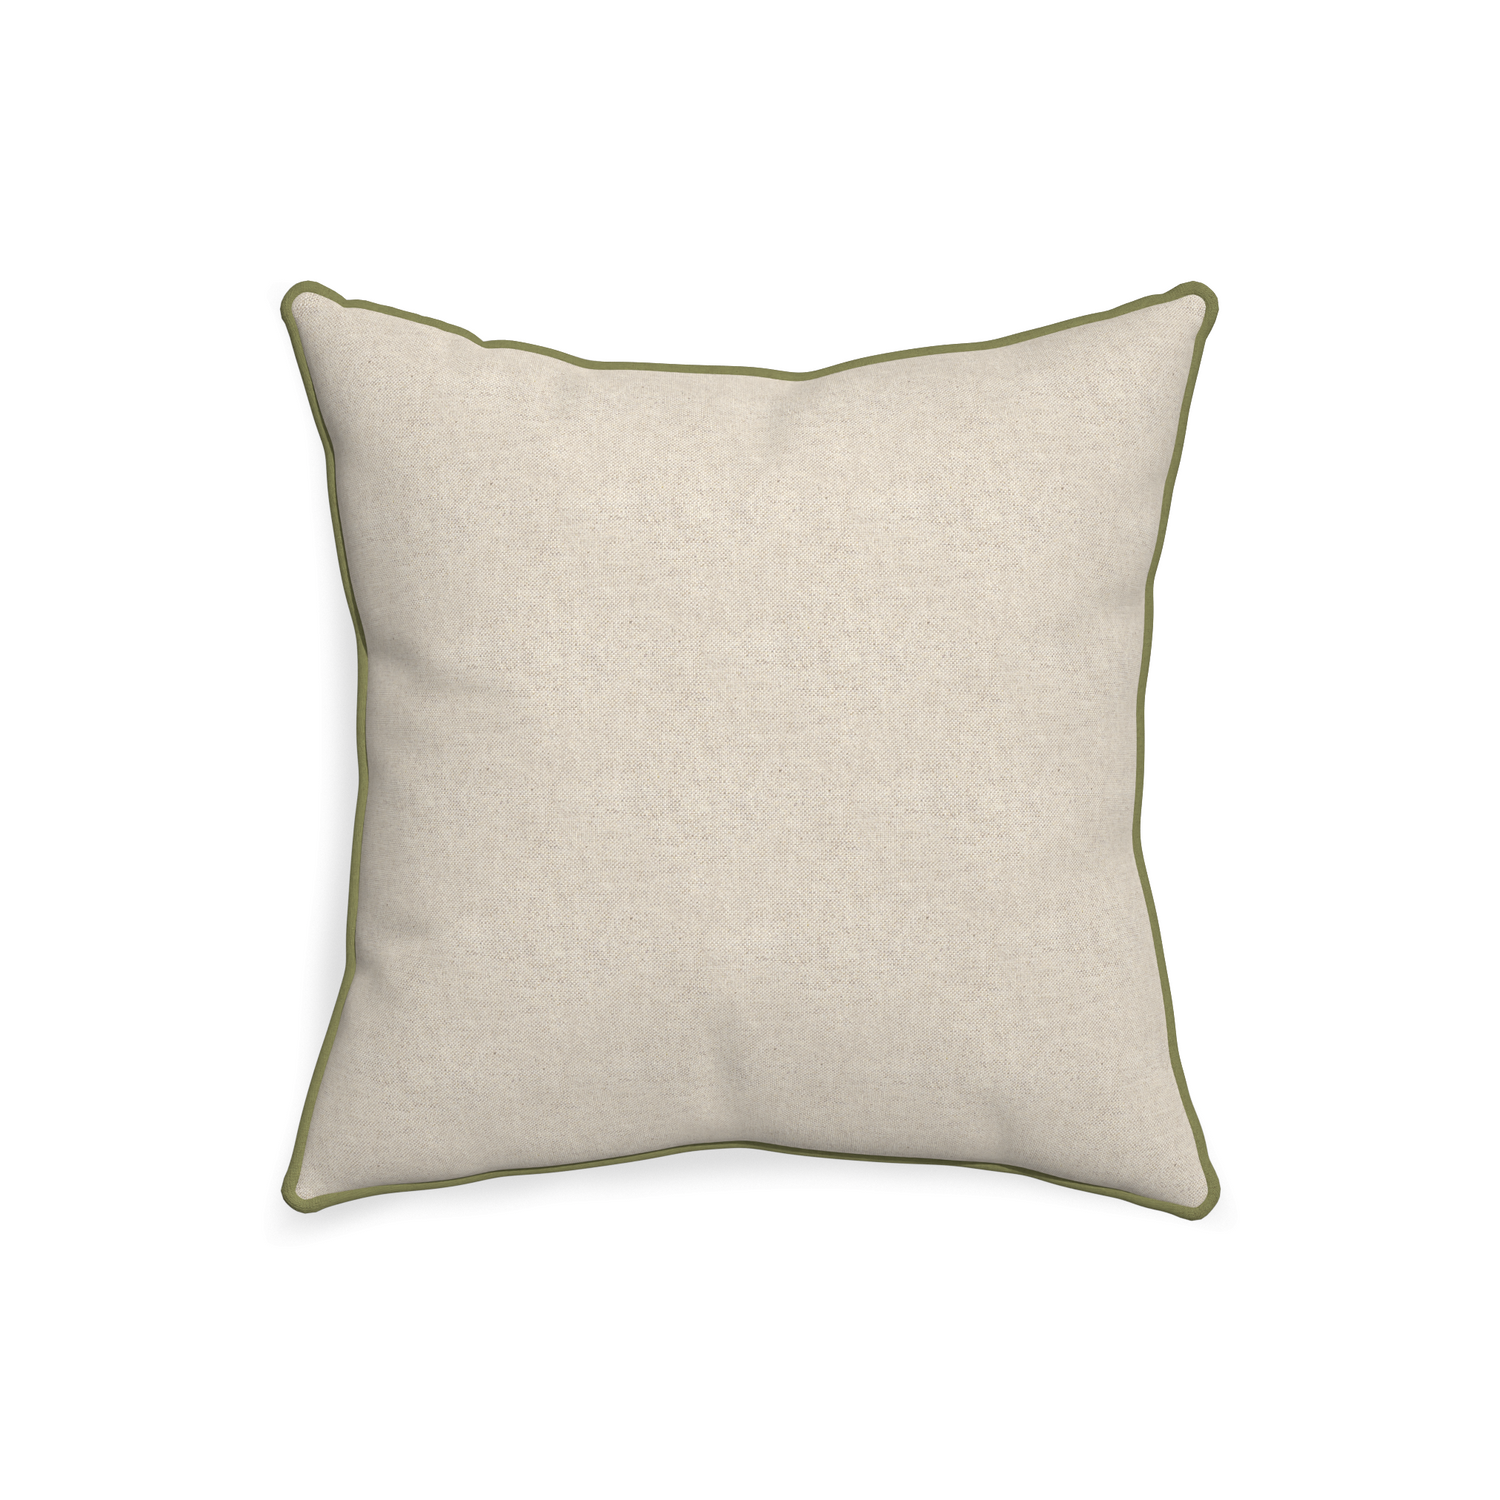 square light brown pillow with moss green piping